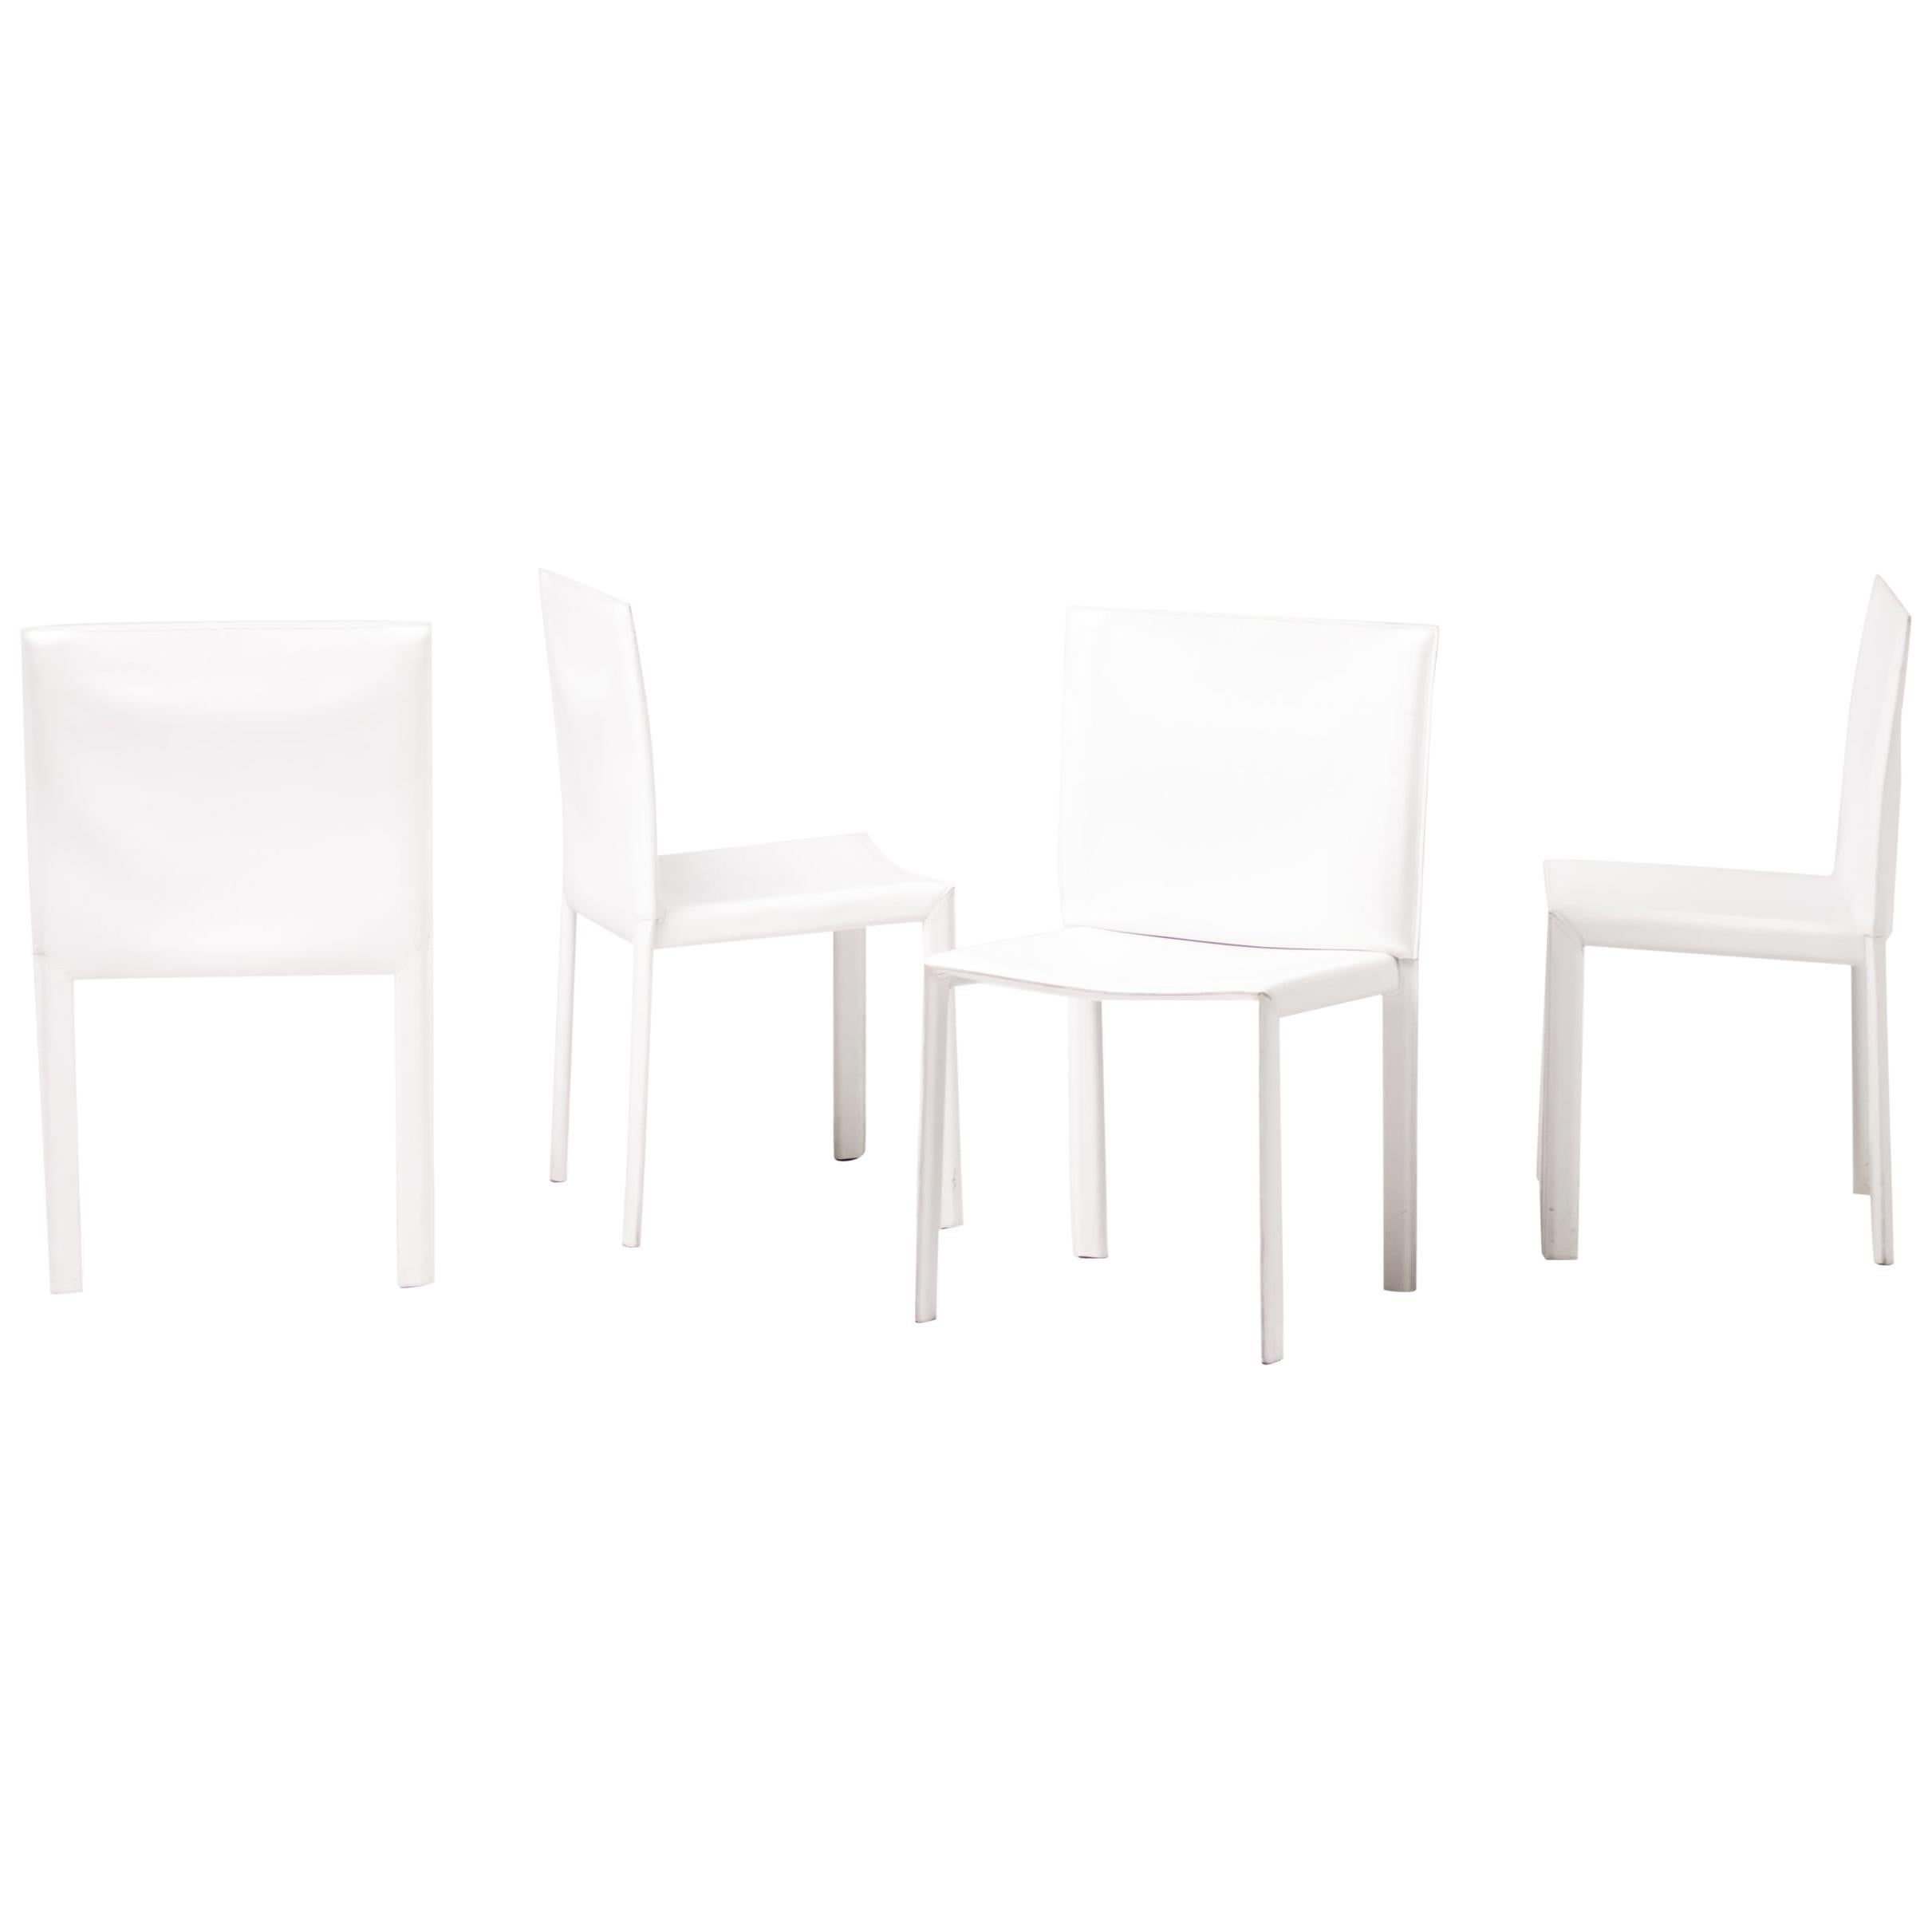 Twelve Dining Chairs by Grazzi and Bianchi for Enrico Pellizzoni